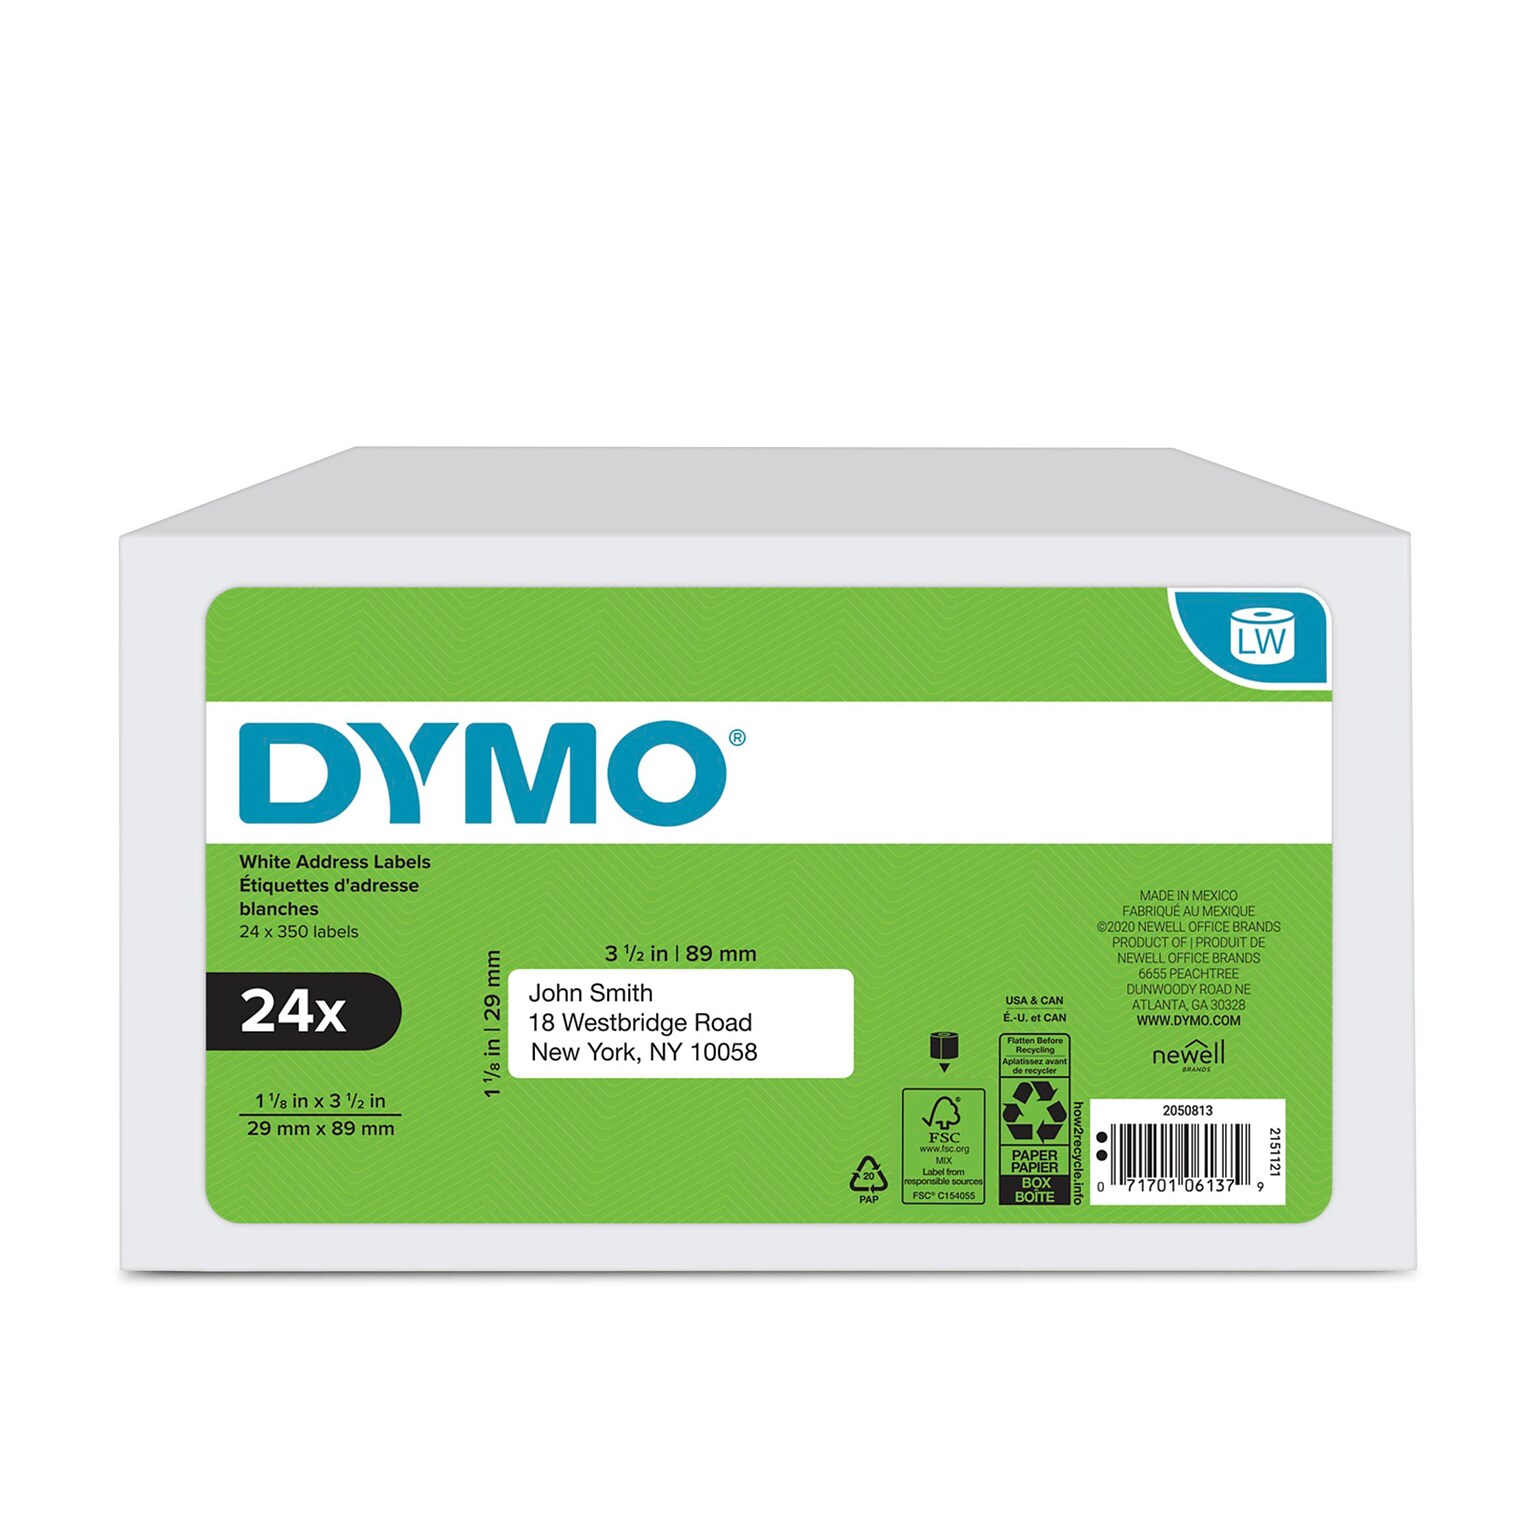 DYMO LabelWriter 2050813 Mailing Address Labels, 3-1/2 x 1-1/8, Black on White, 350 Labels/Roll, 24 Rolls/Box (2050813)